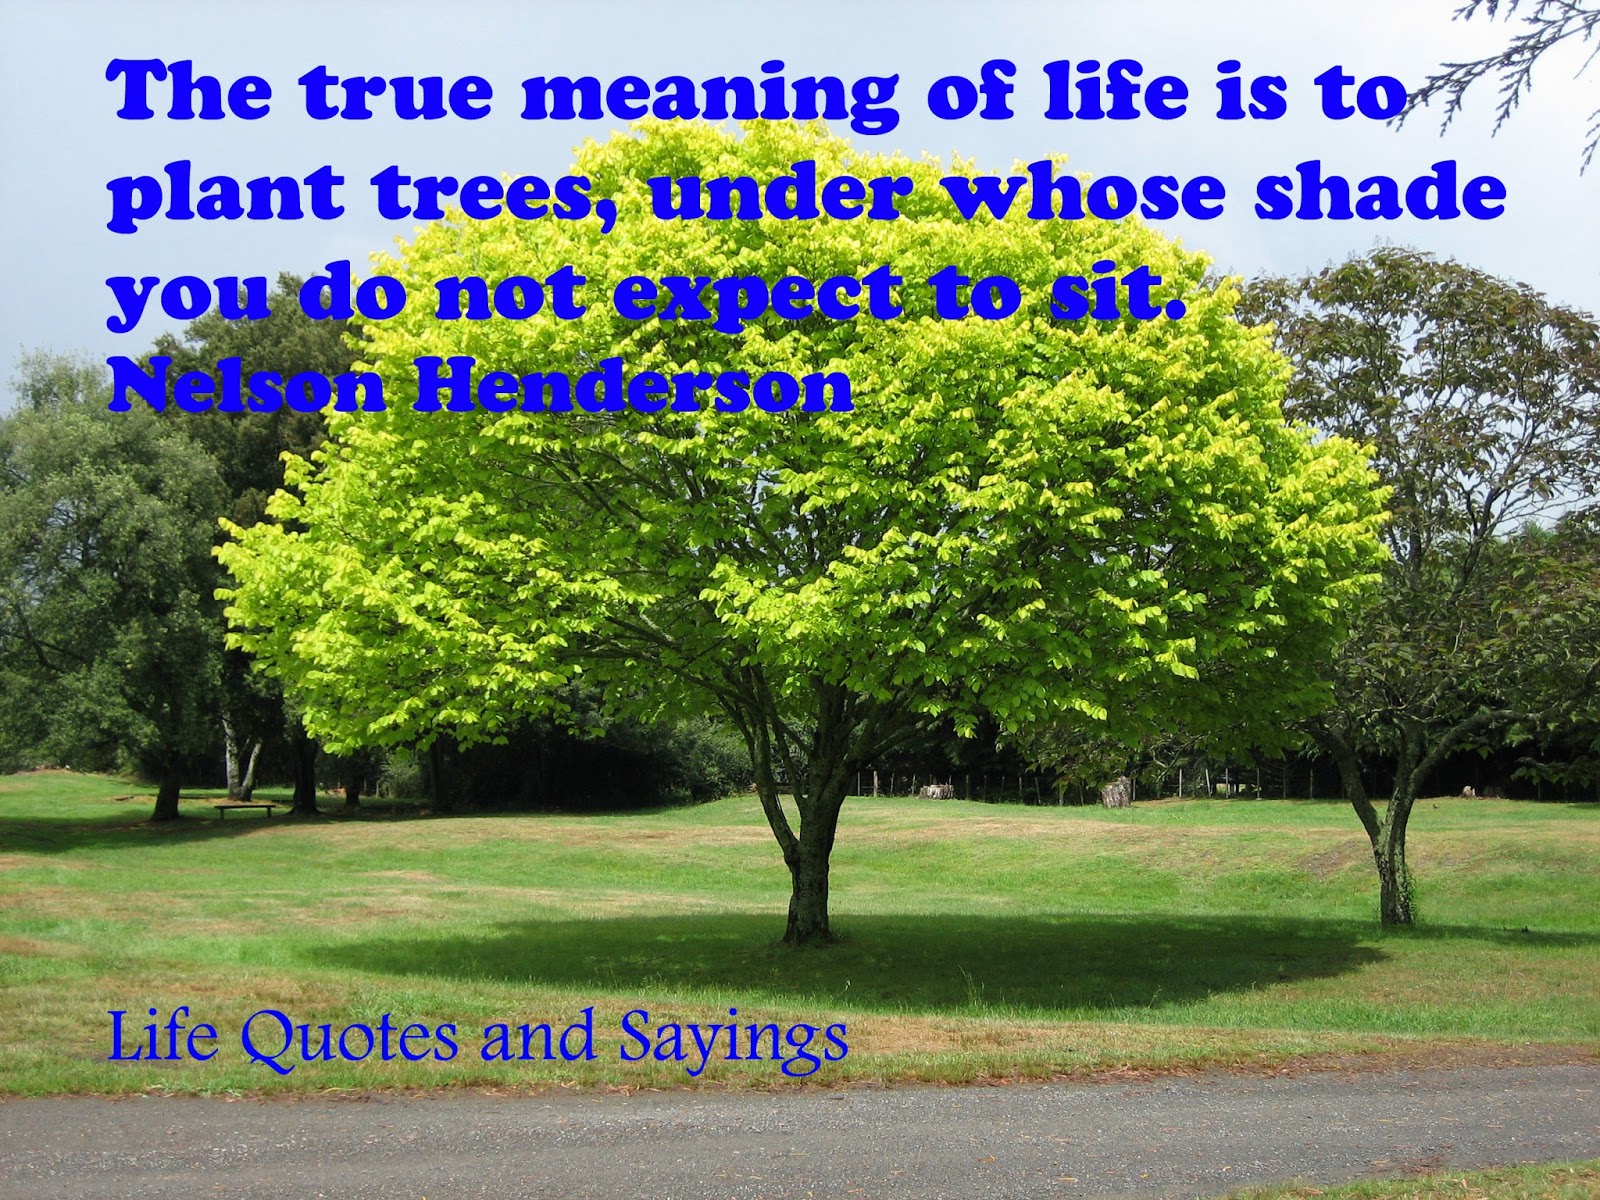 The true meaning of Life is to plant trees under whose shade you do not expect to sit